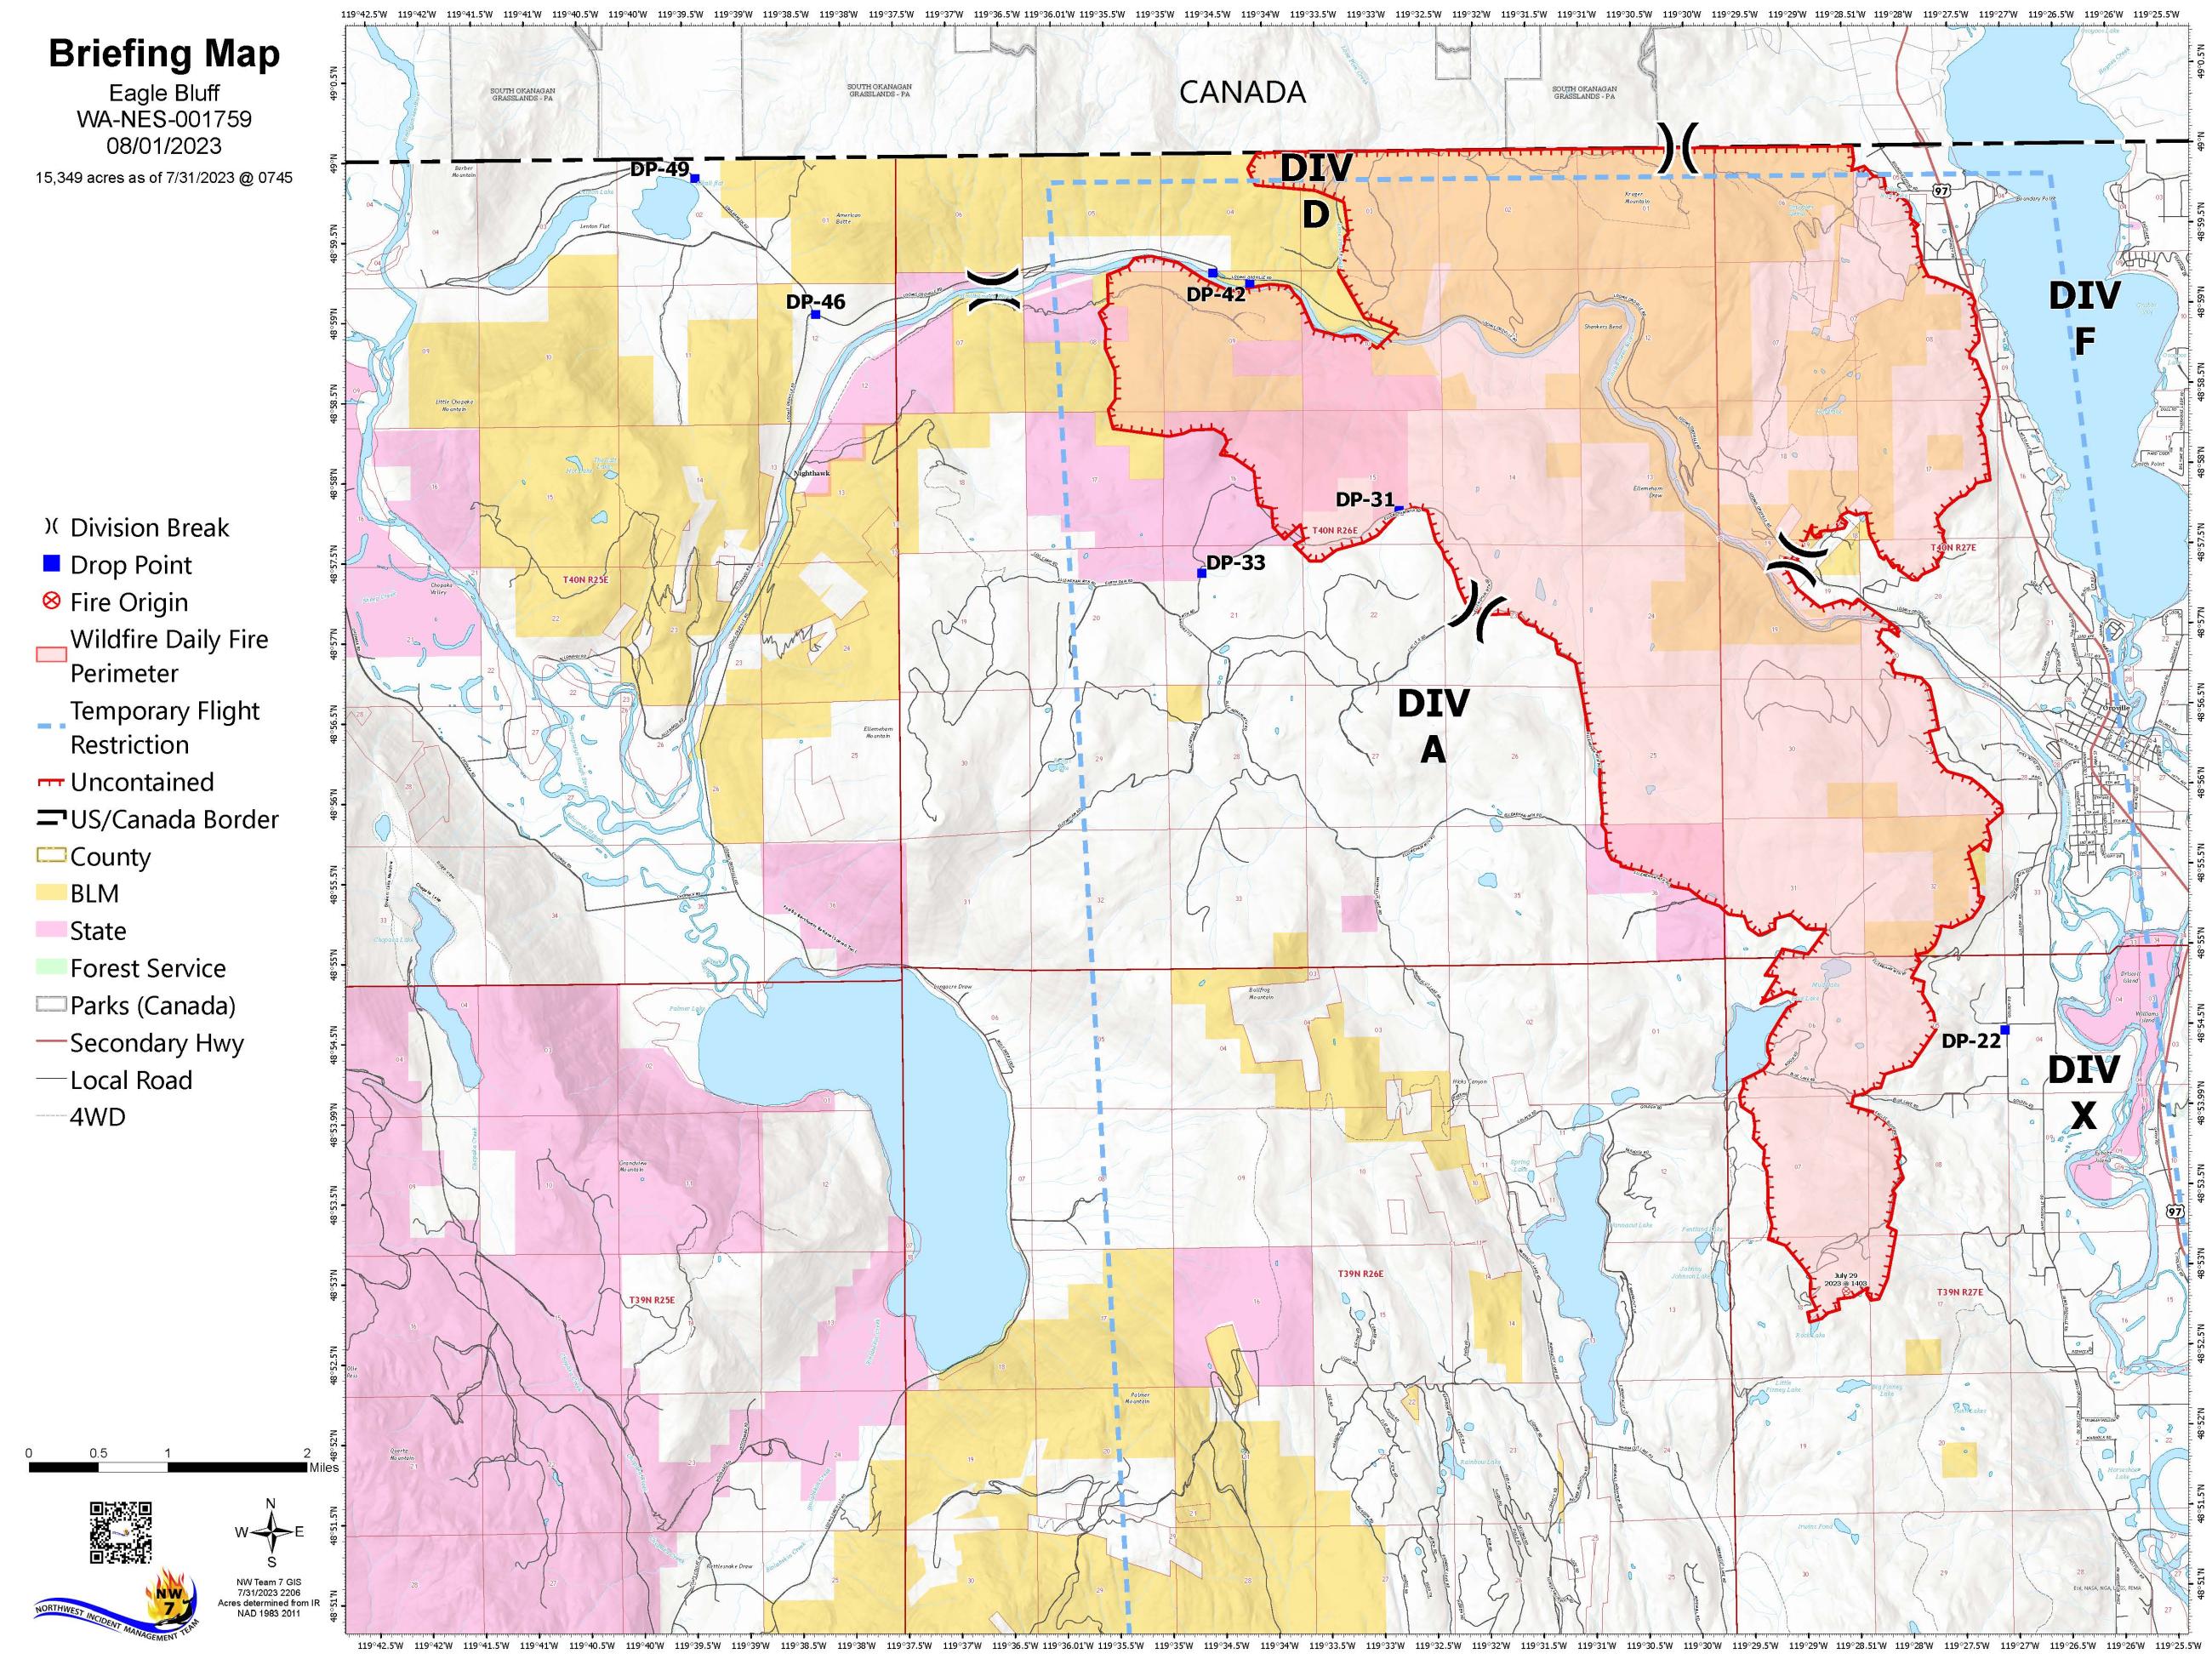 August 1, 2023 map of Eagle Bluff Fire perimeter